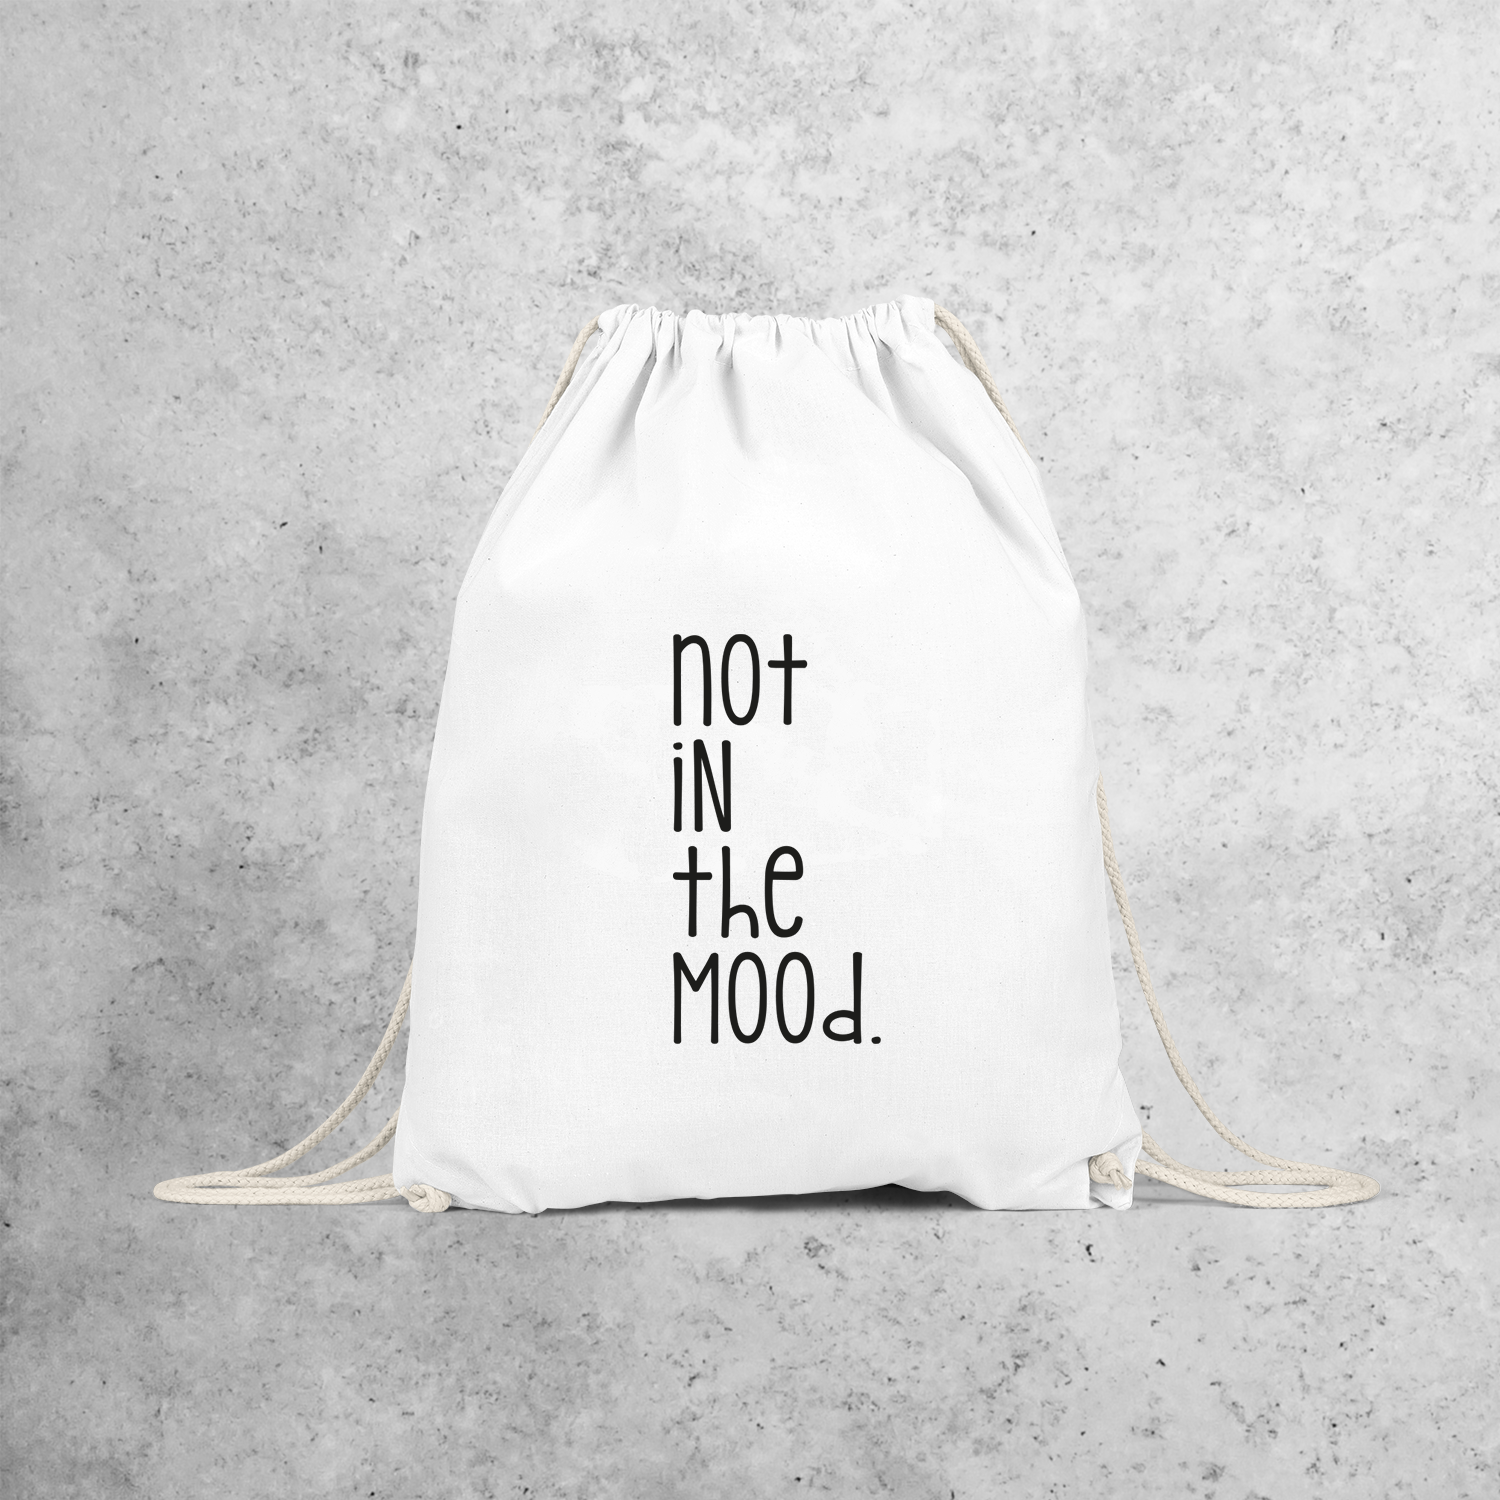 'Not in the mood' backpack